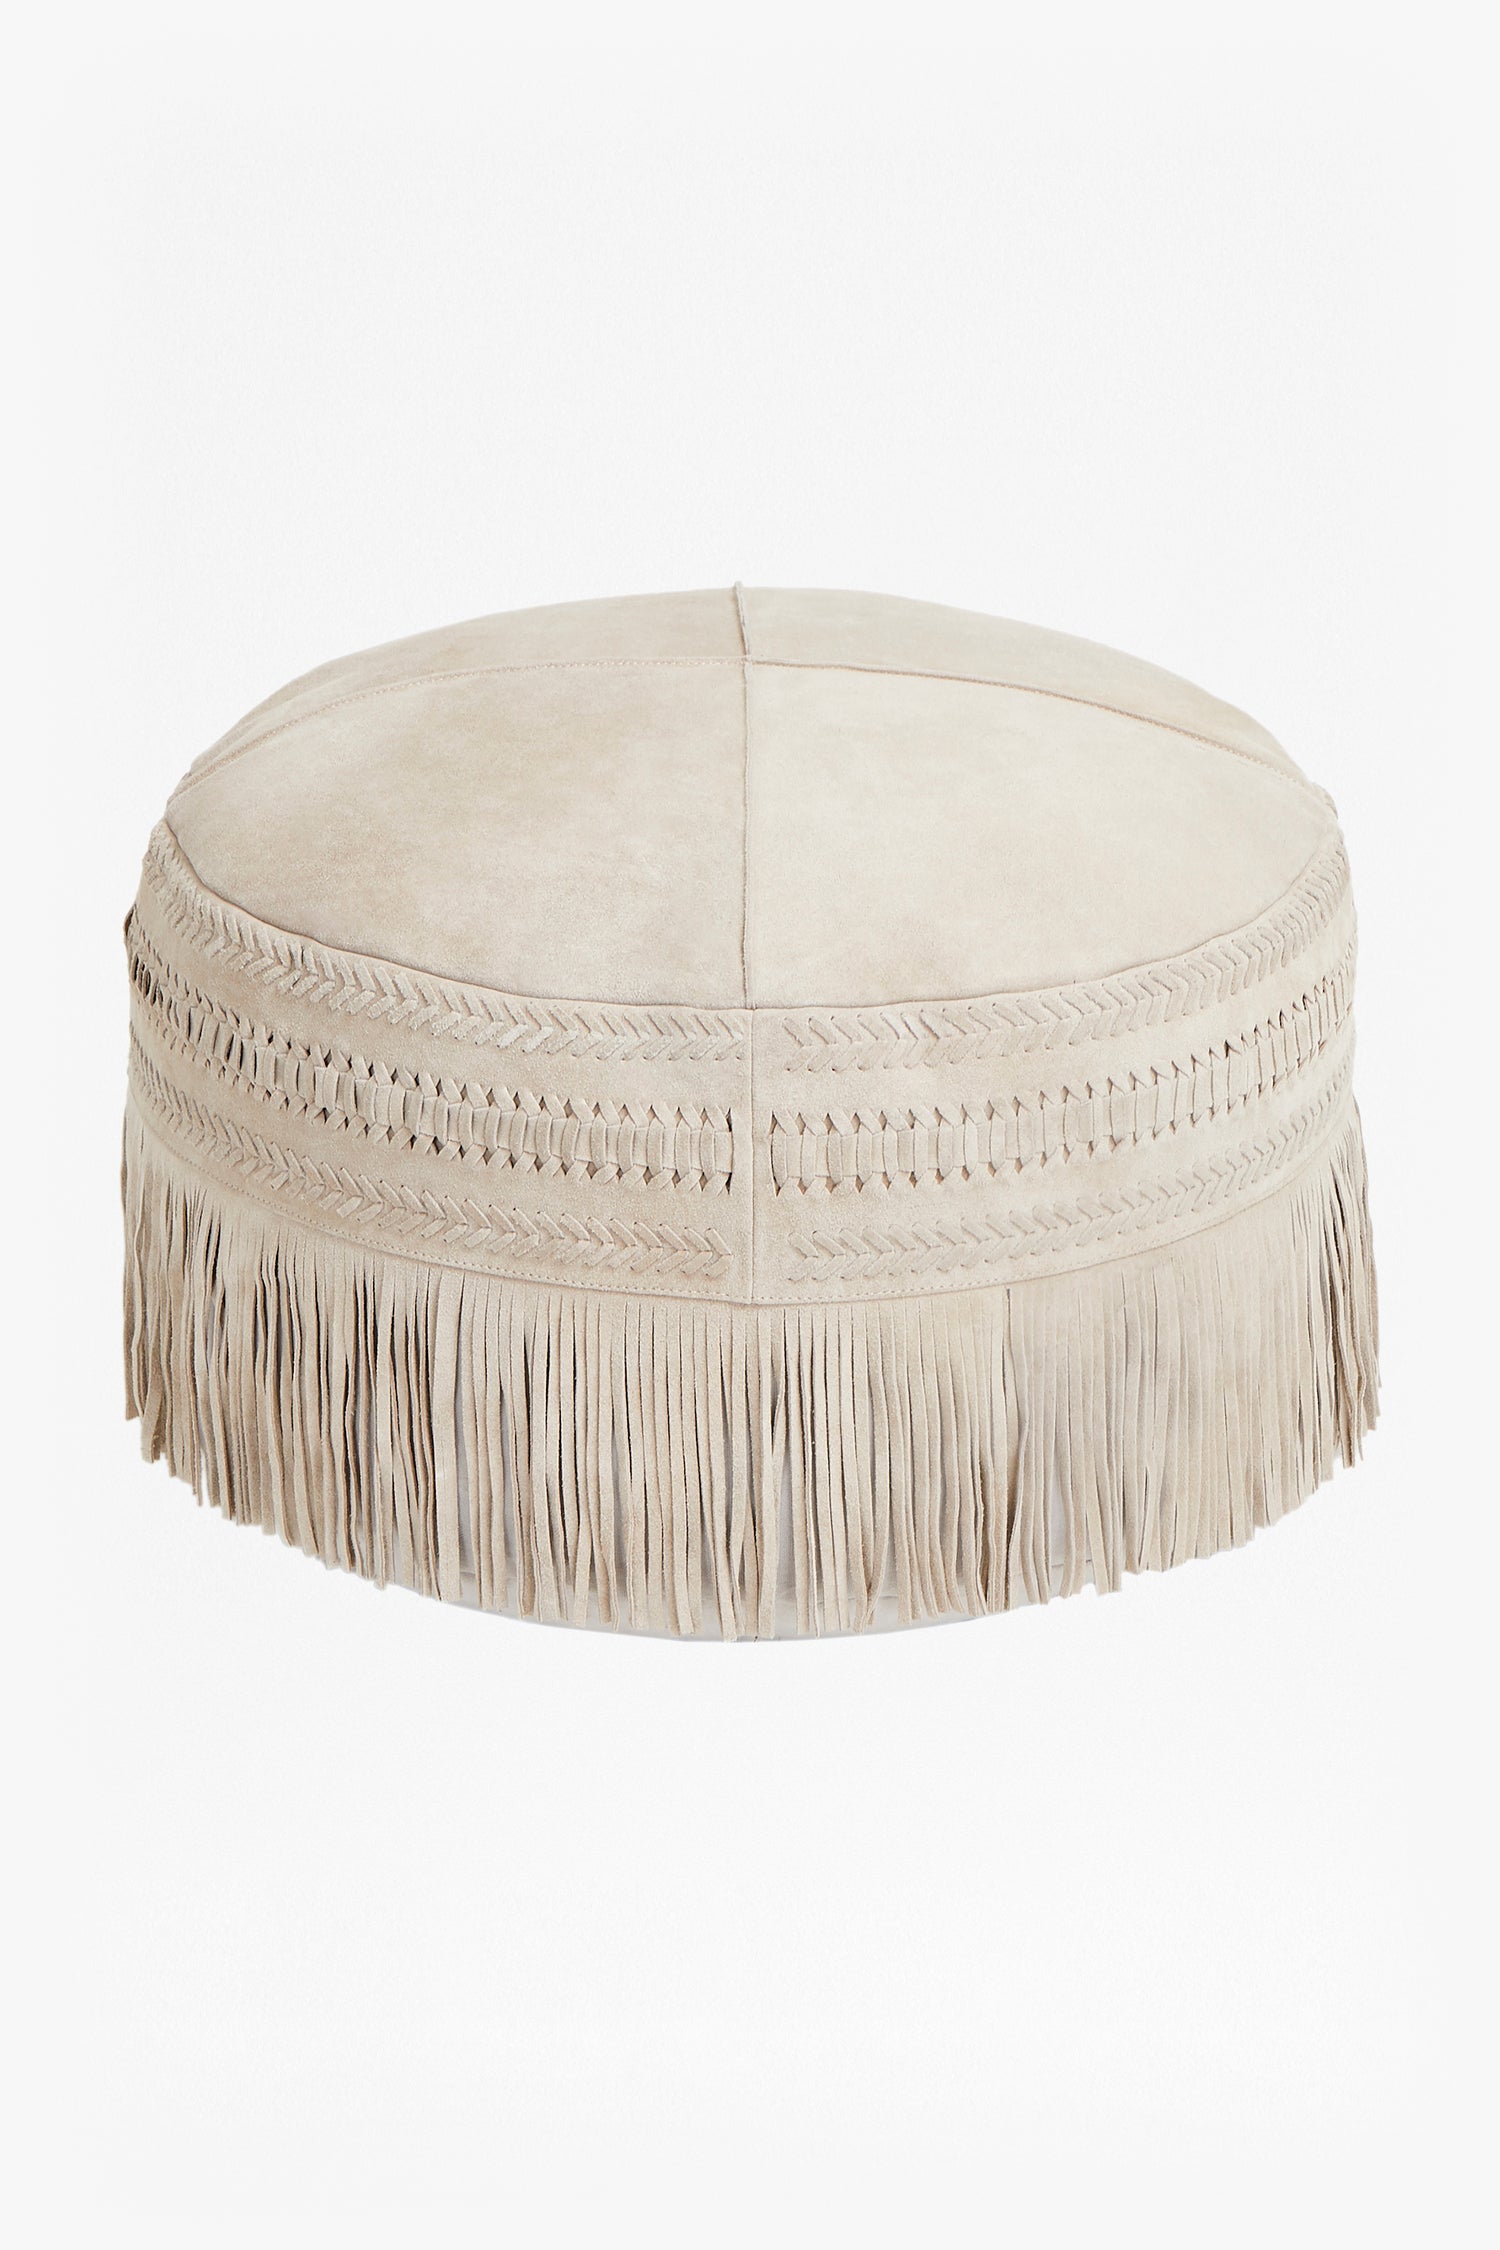 French Connection - Sand Dune Suede Tassel Pouffe | French Connection |  Chair & Sofa Cushions | One size - Beige - Size: OS